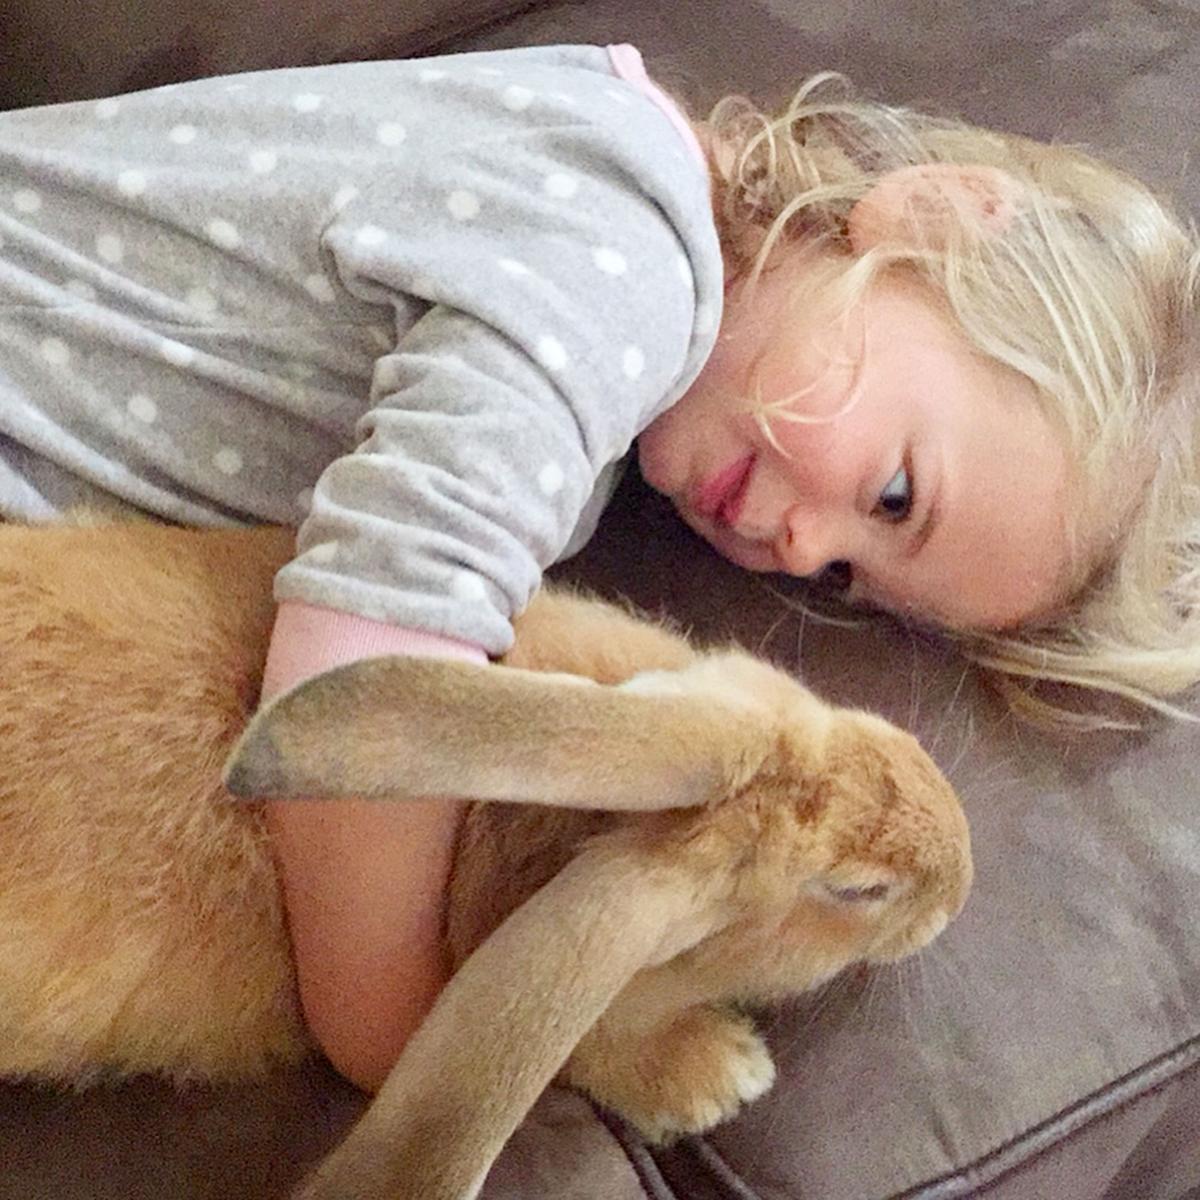 Cocoa Puff the rabbit loves to snuggle with owner Macy. (Caters News)